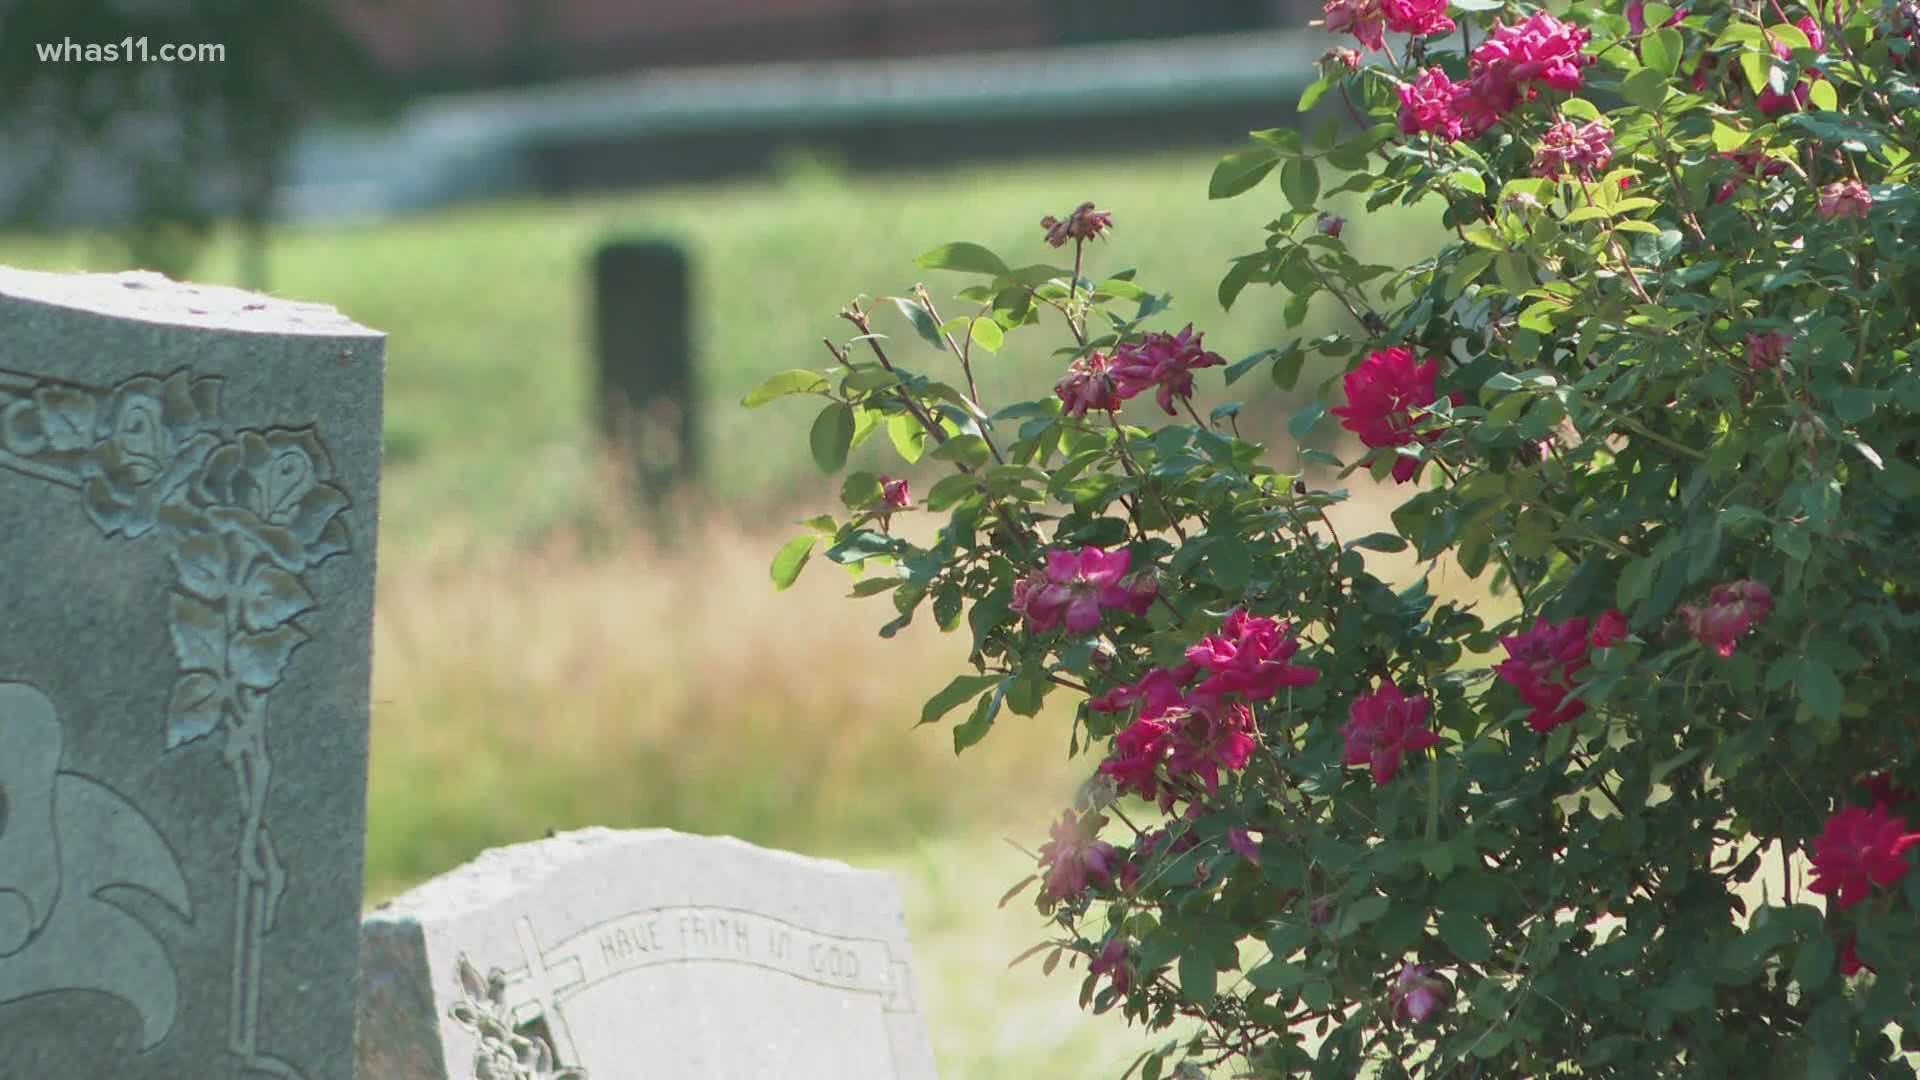 Volunteers helped clean up the historic Greenwood Cemetery in Louisville's Chickasaw neighborhood after months of neglect.